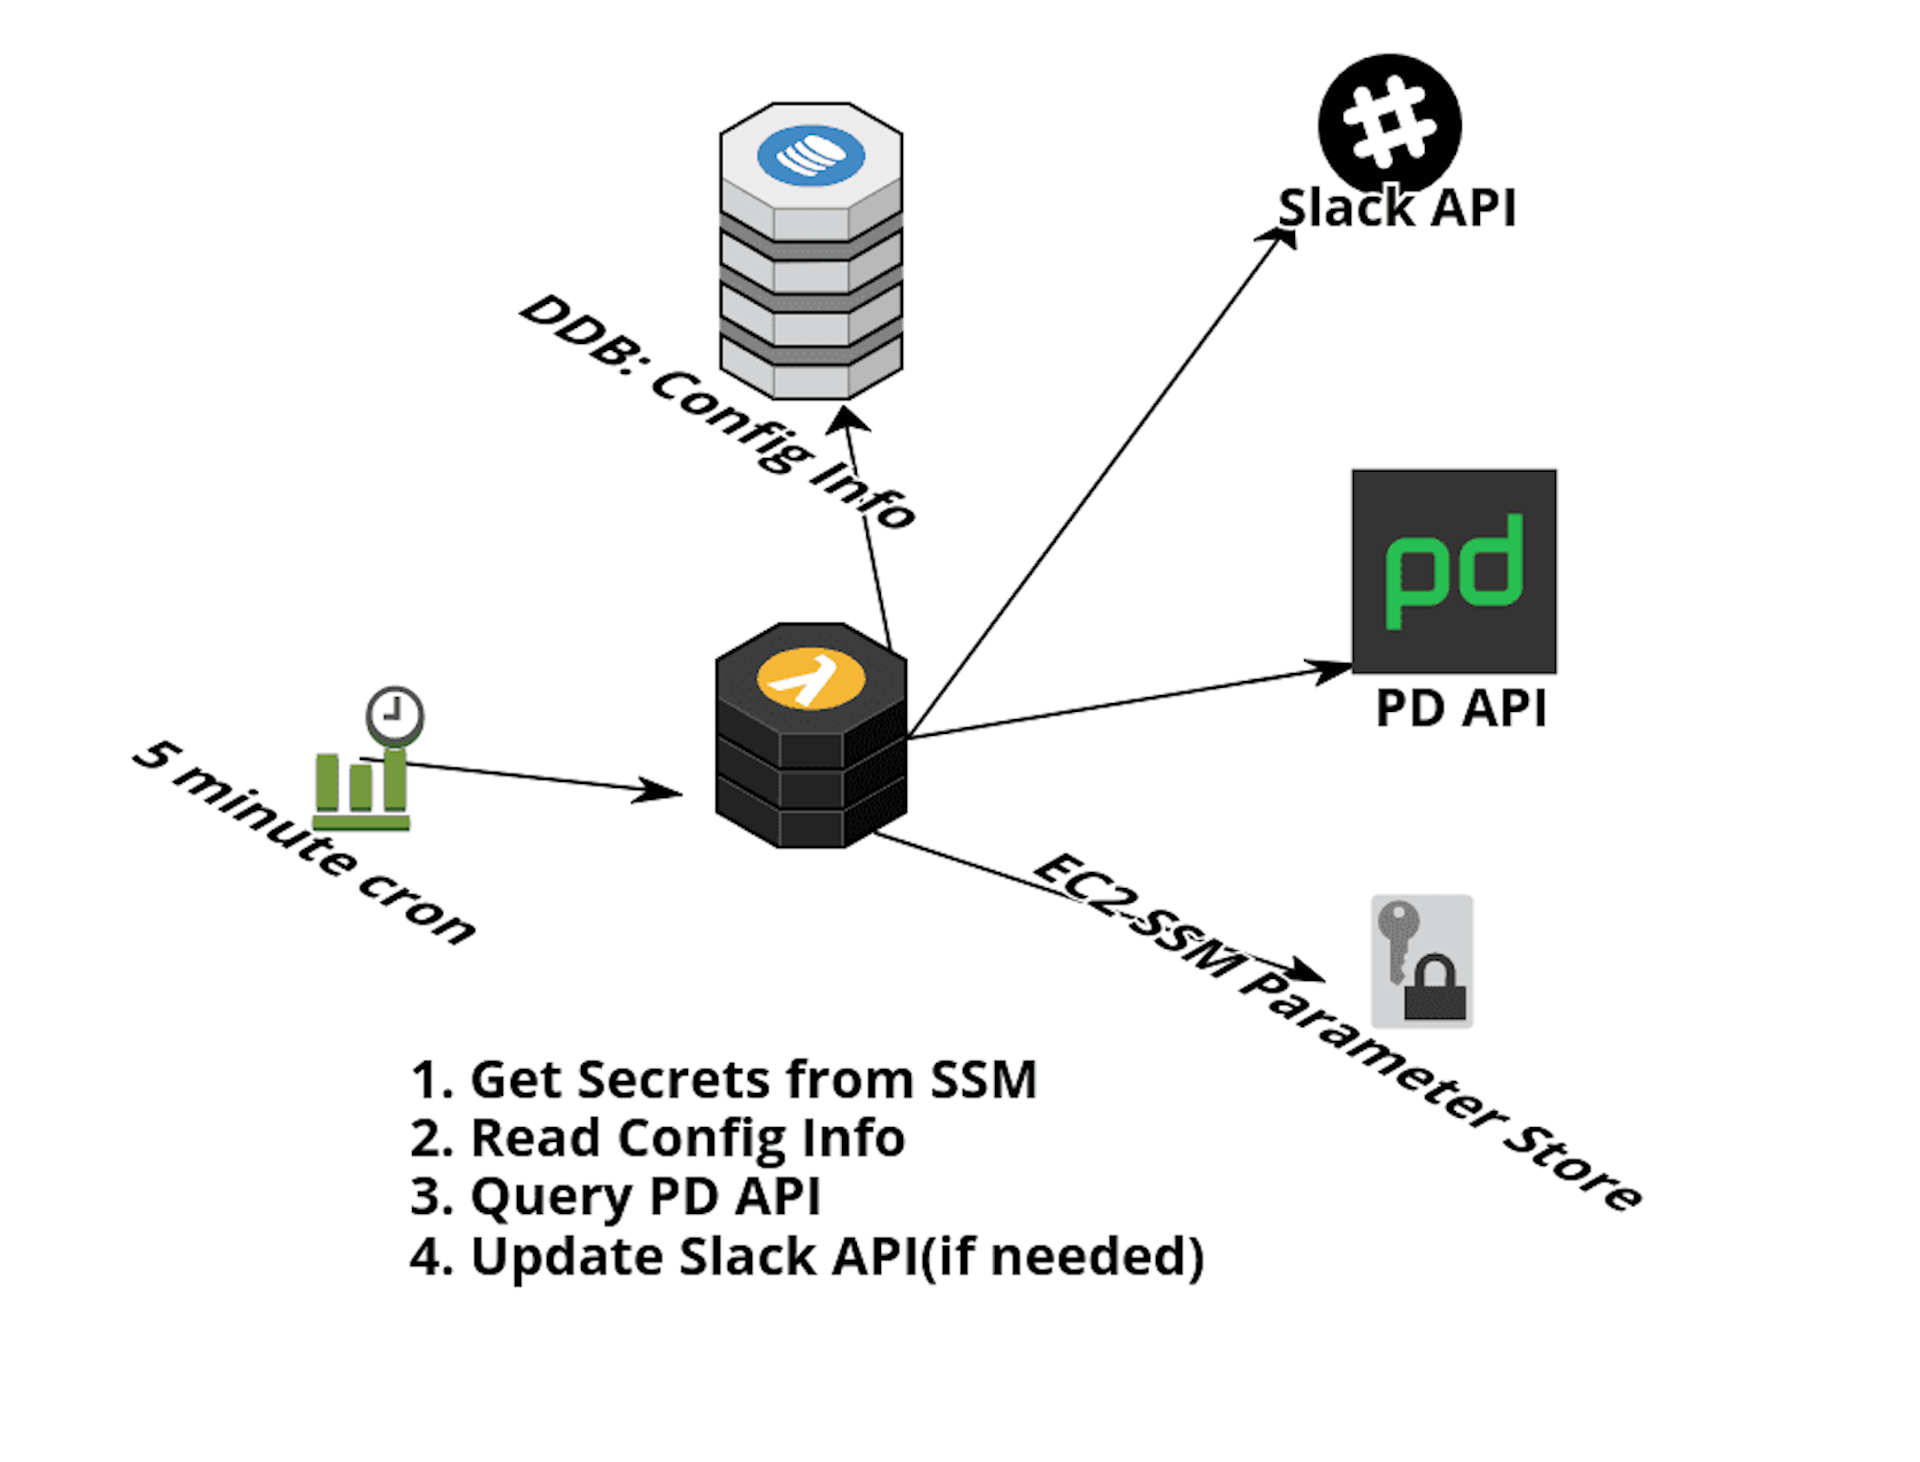 Architecture diagram from the PagerDuty repository